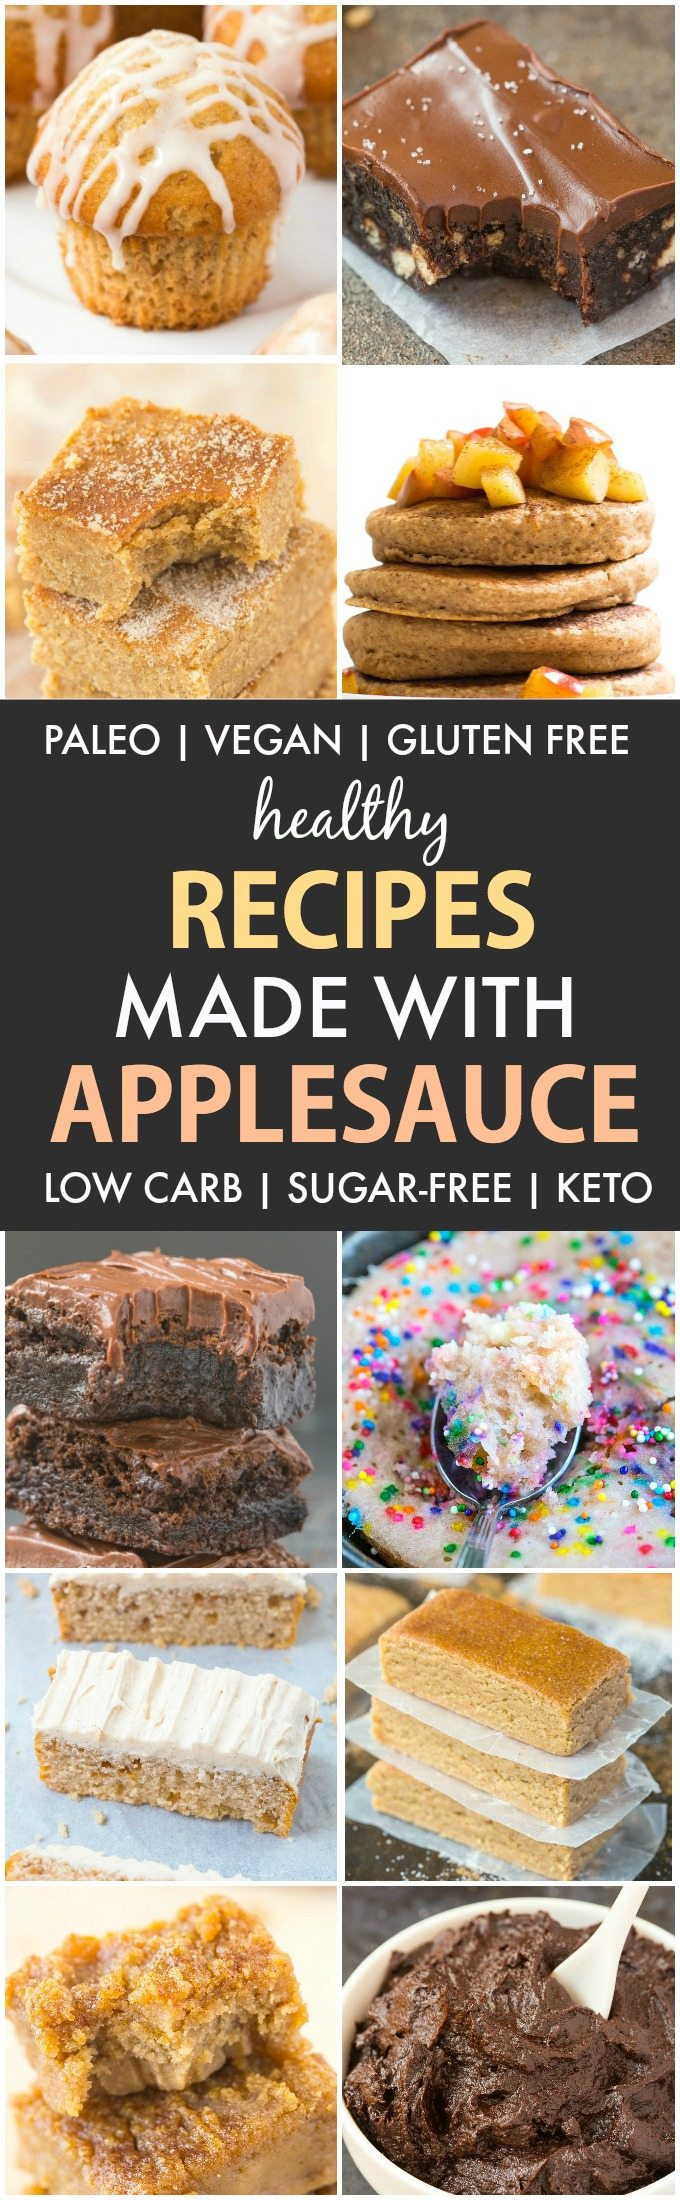 Healthy Recipes Using Applesauce
 20 Healthy Recipes Using Applesauce Paleo Vegan Gluten